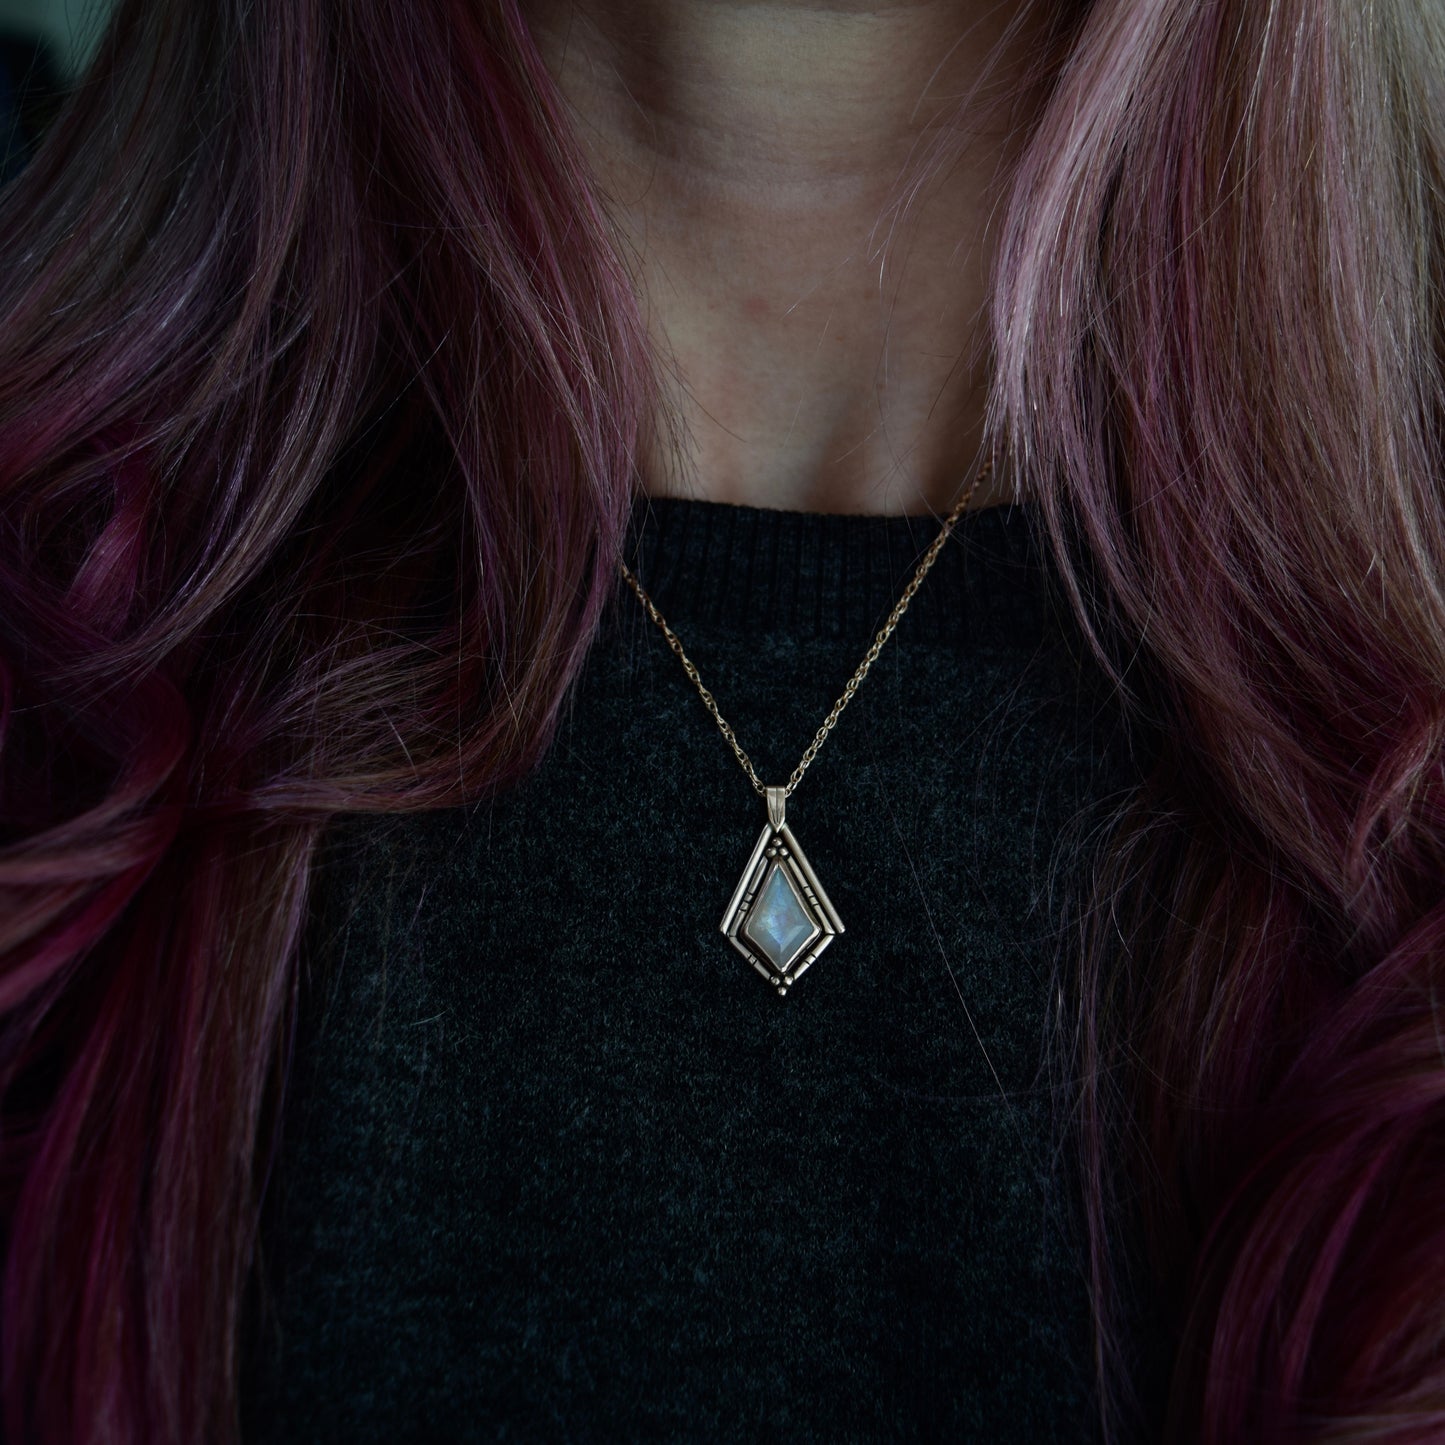 North Star Necklace with 14k Solid Rose Gold, Rose Gold Fill Chain, and Rainbow Moonstone